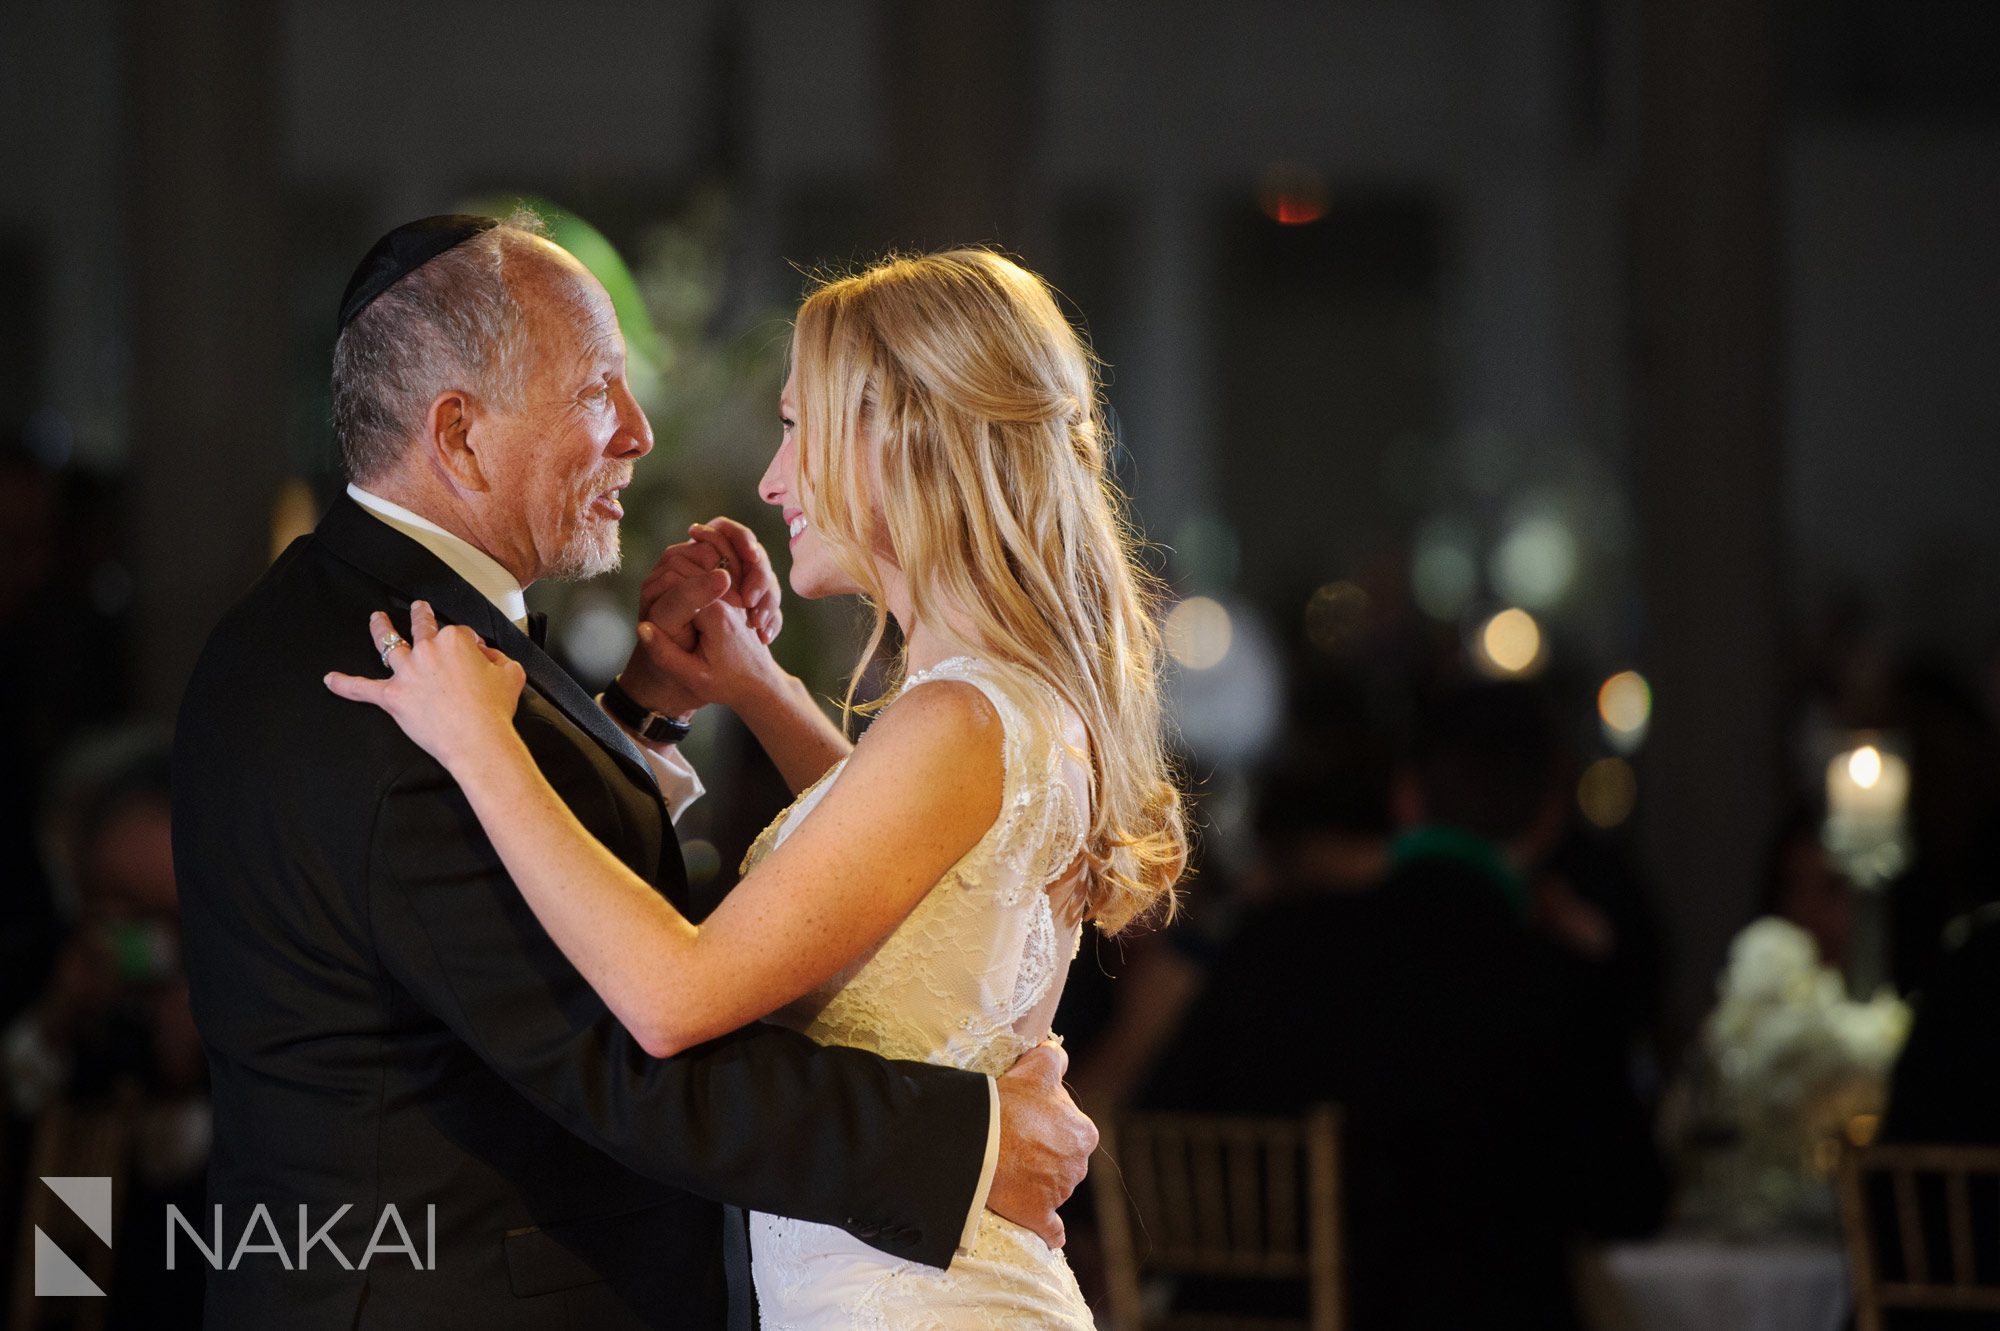 father daughter dance fairmont chicago wedding reception picture